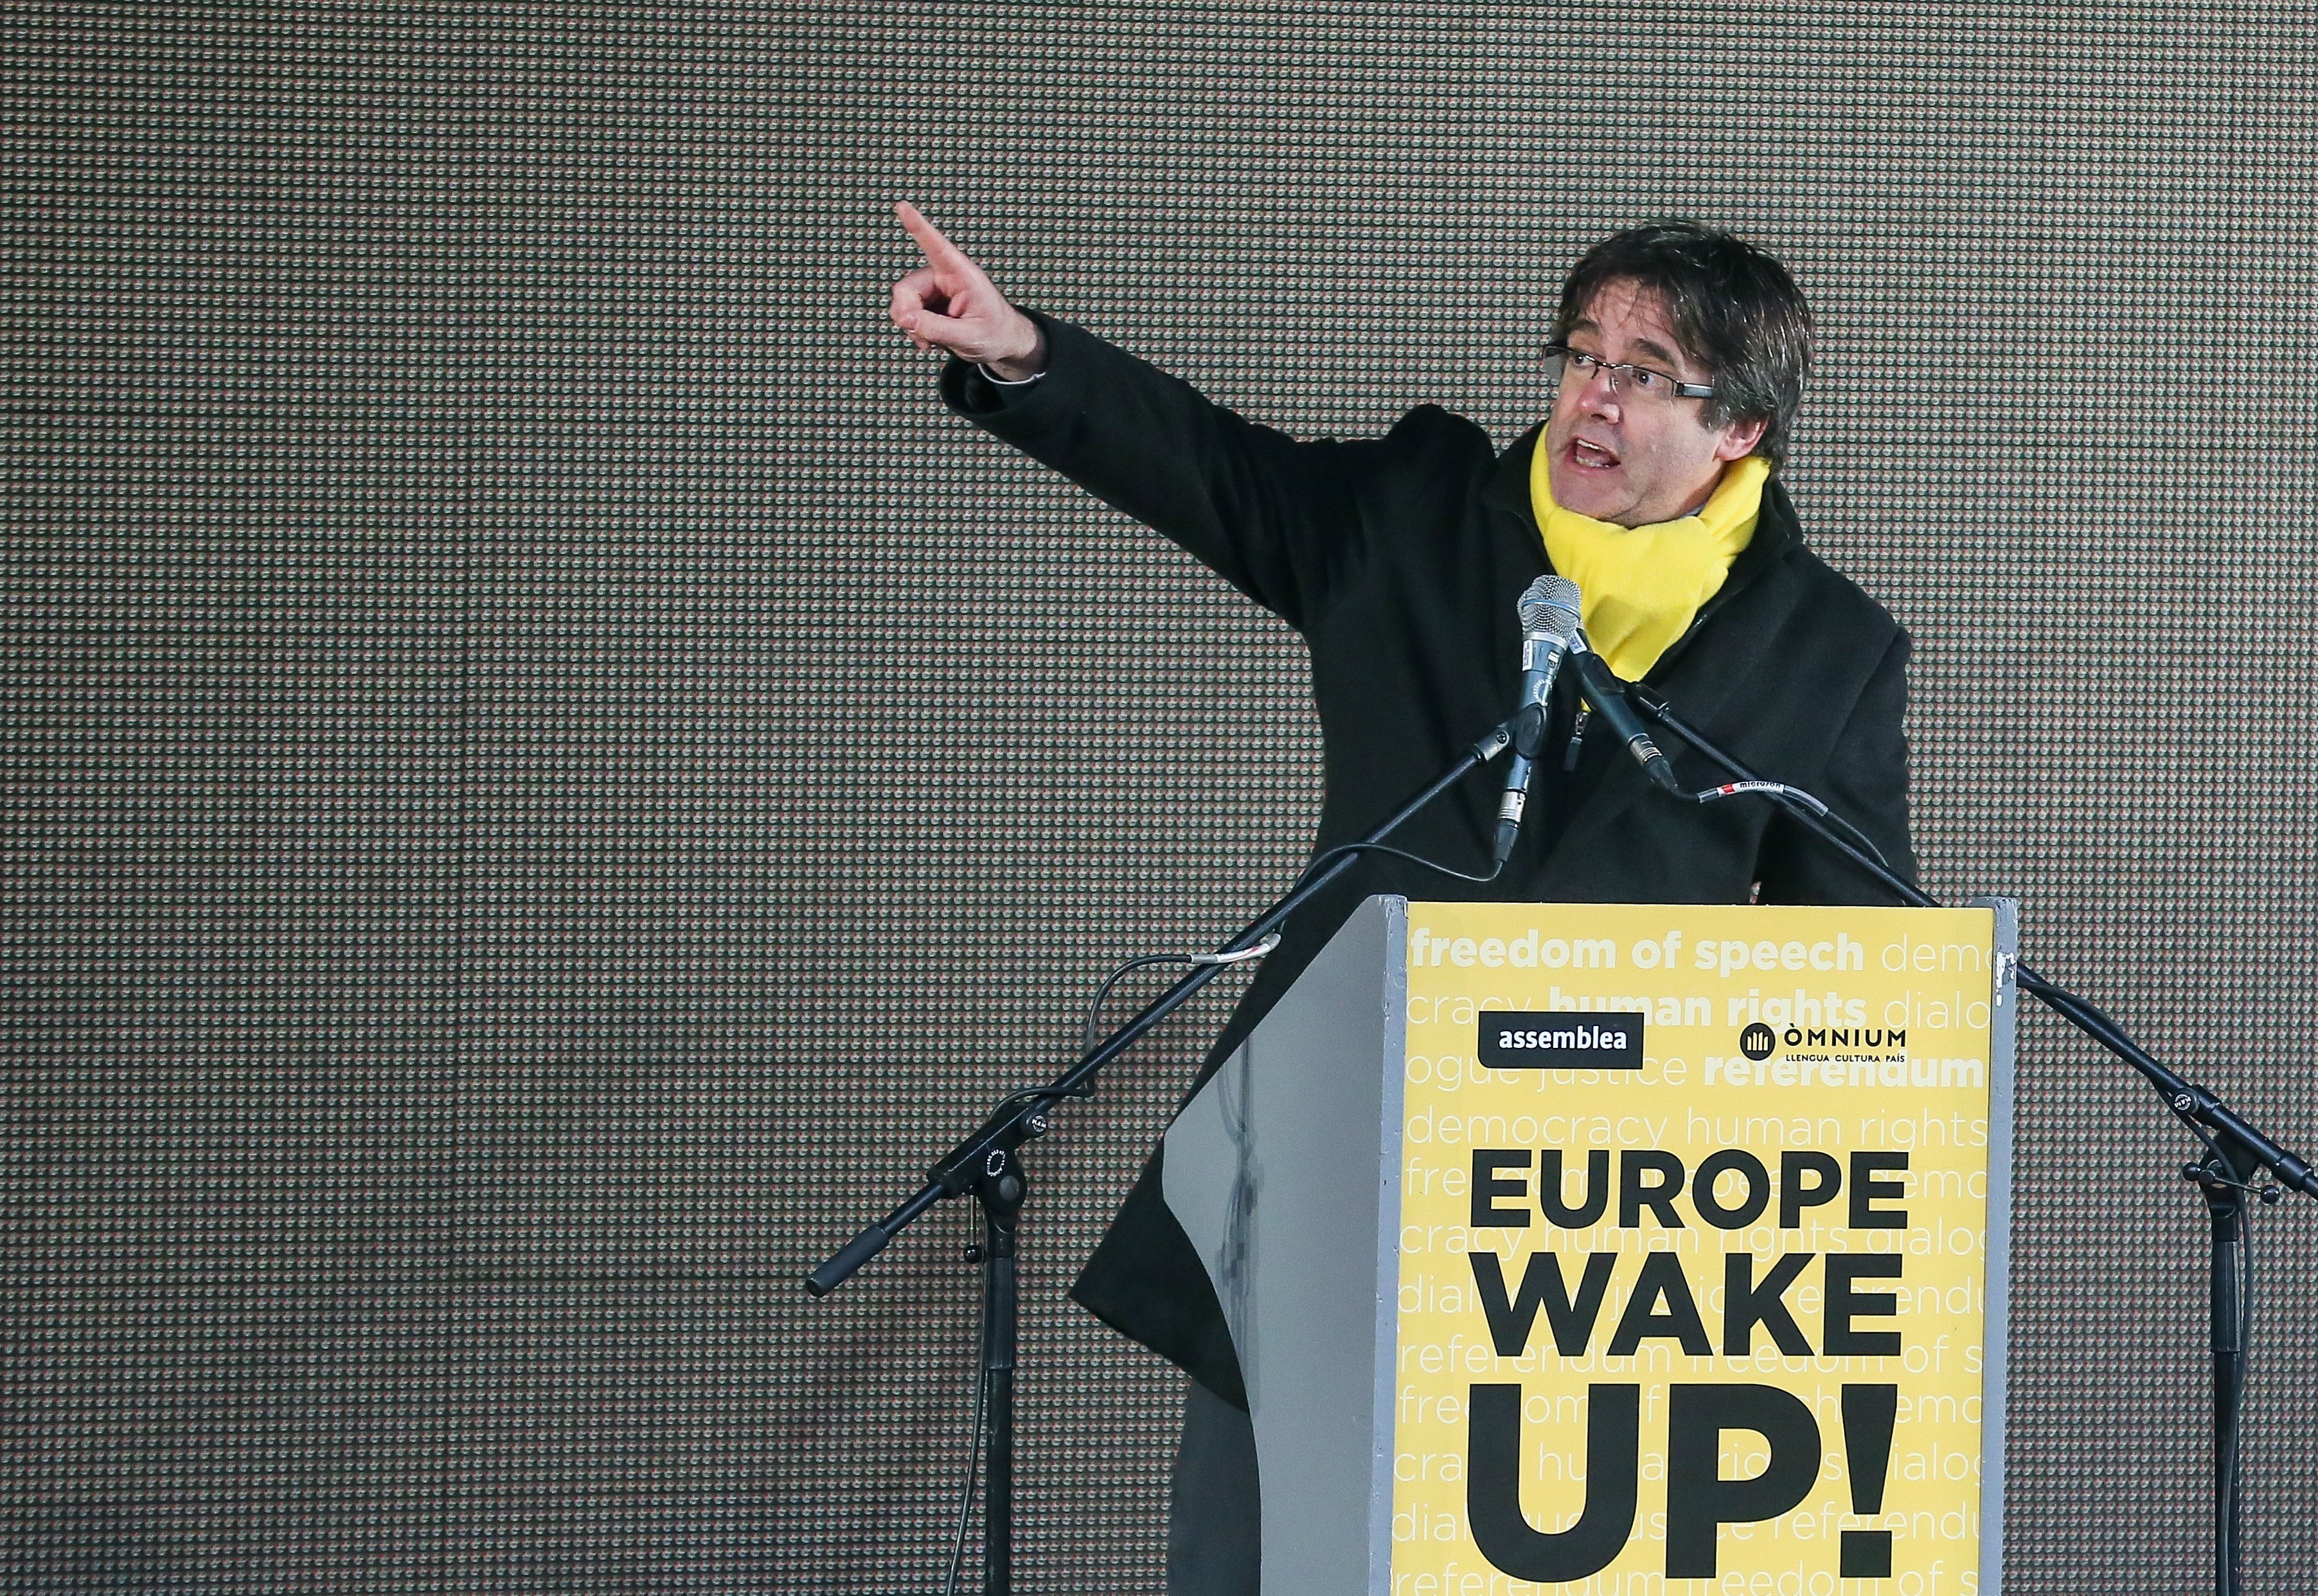 Puigdemont calls for Europe to say "no, not like that" to states which don't respect basic rights